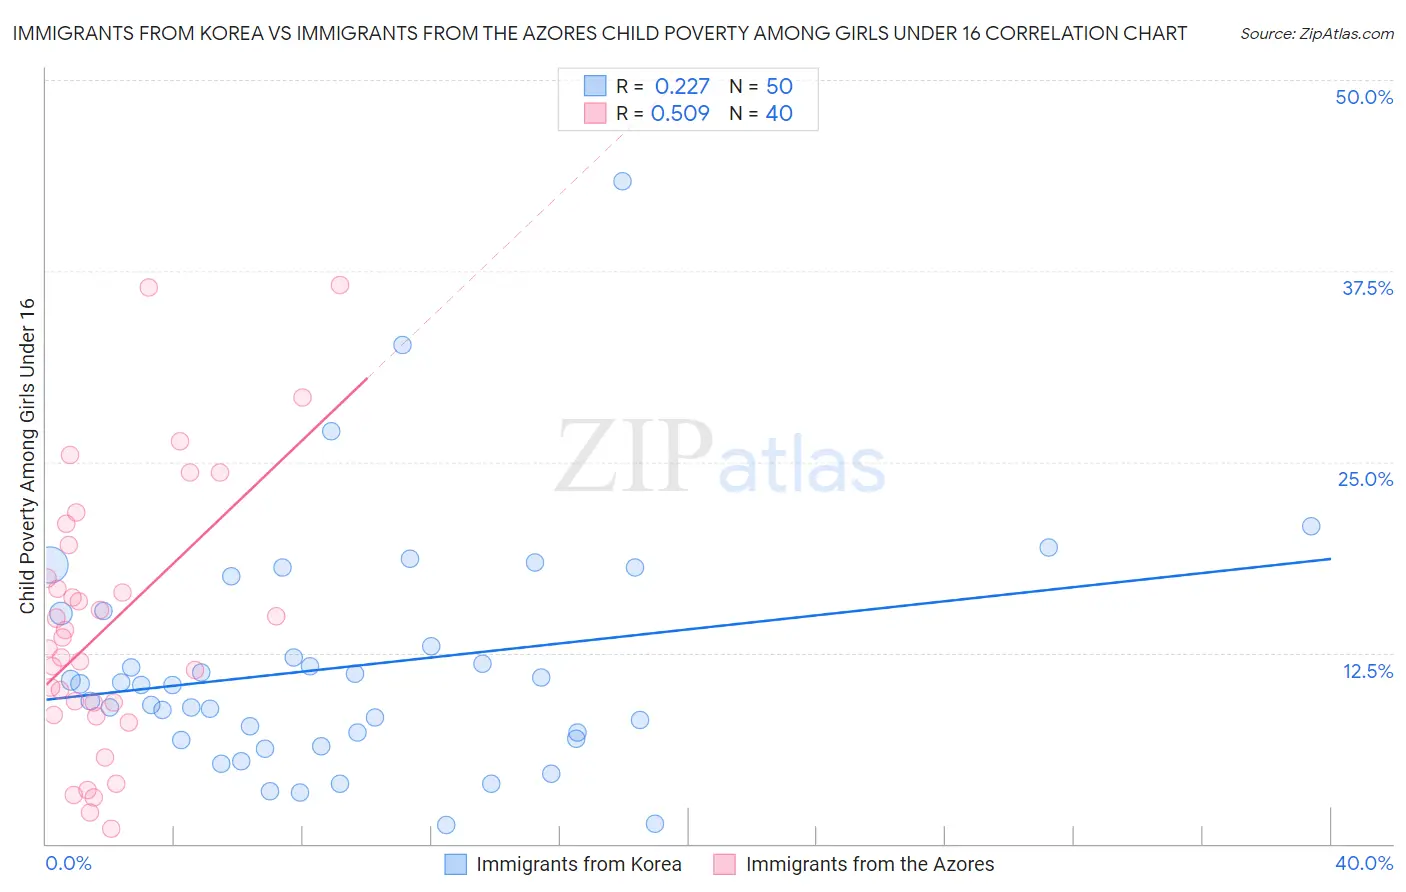 Immigrants from Korea vs Immigrants from the Azores Child Poverty Among Girls Under 16